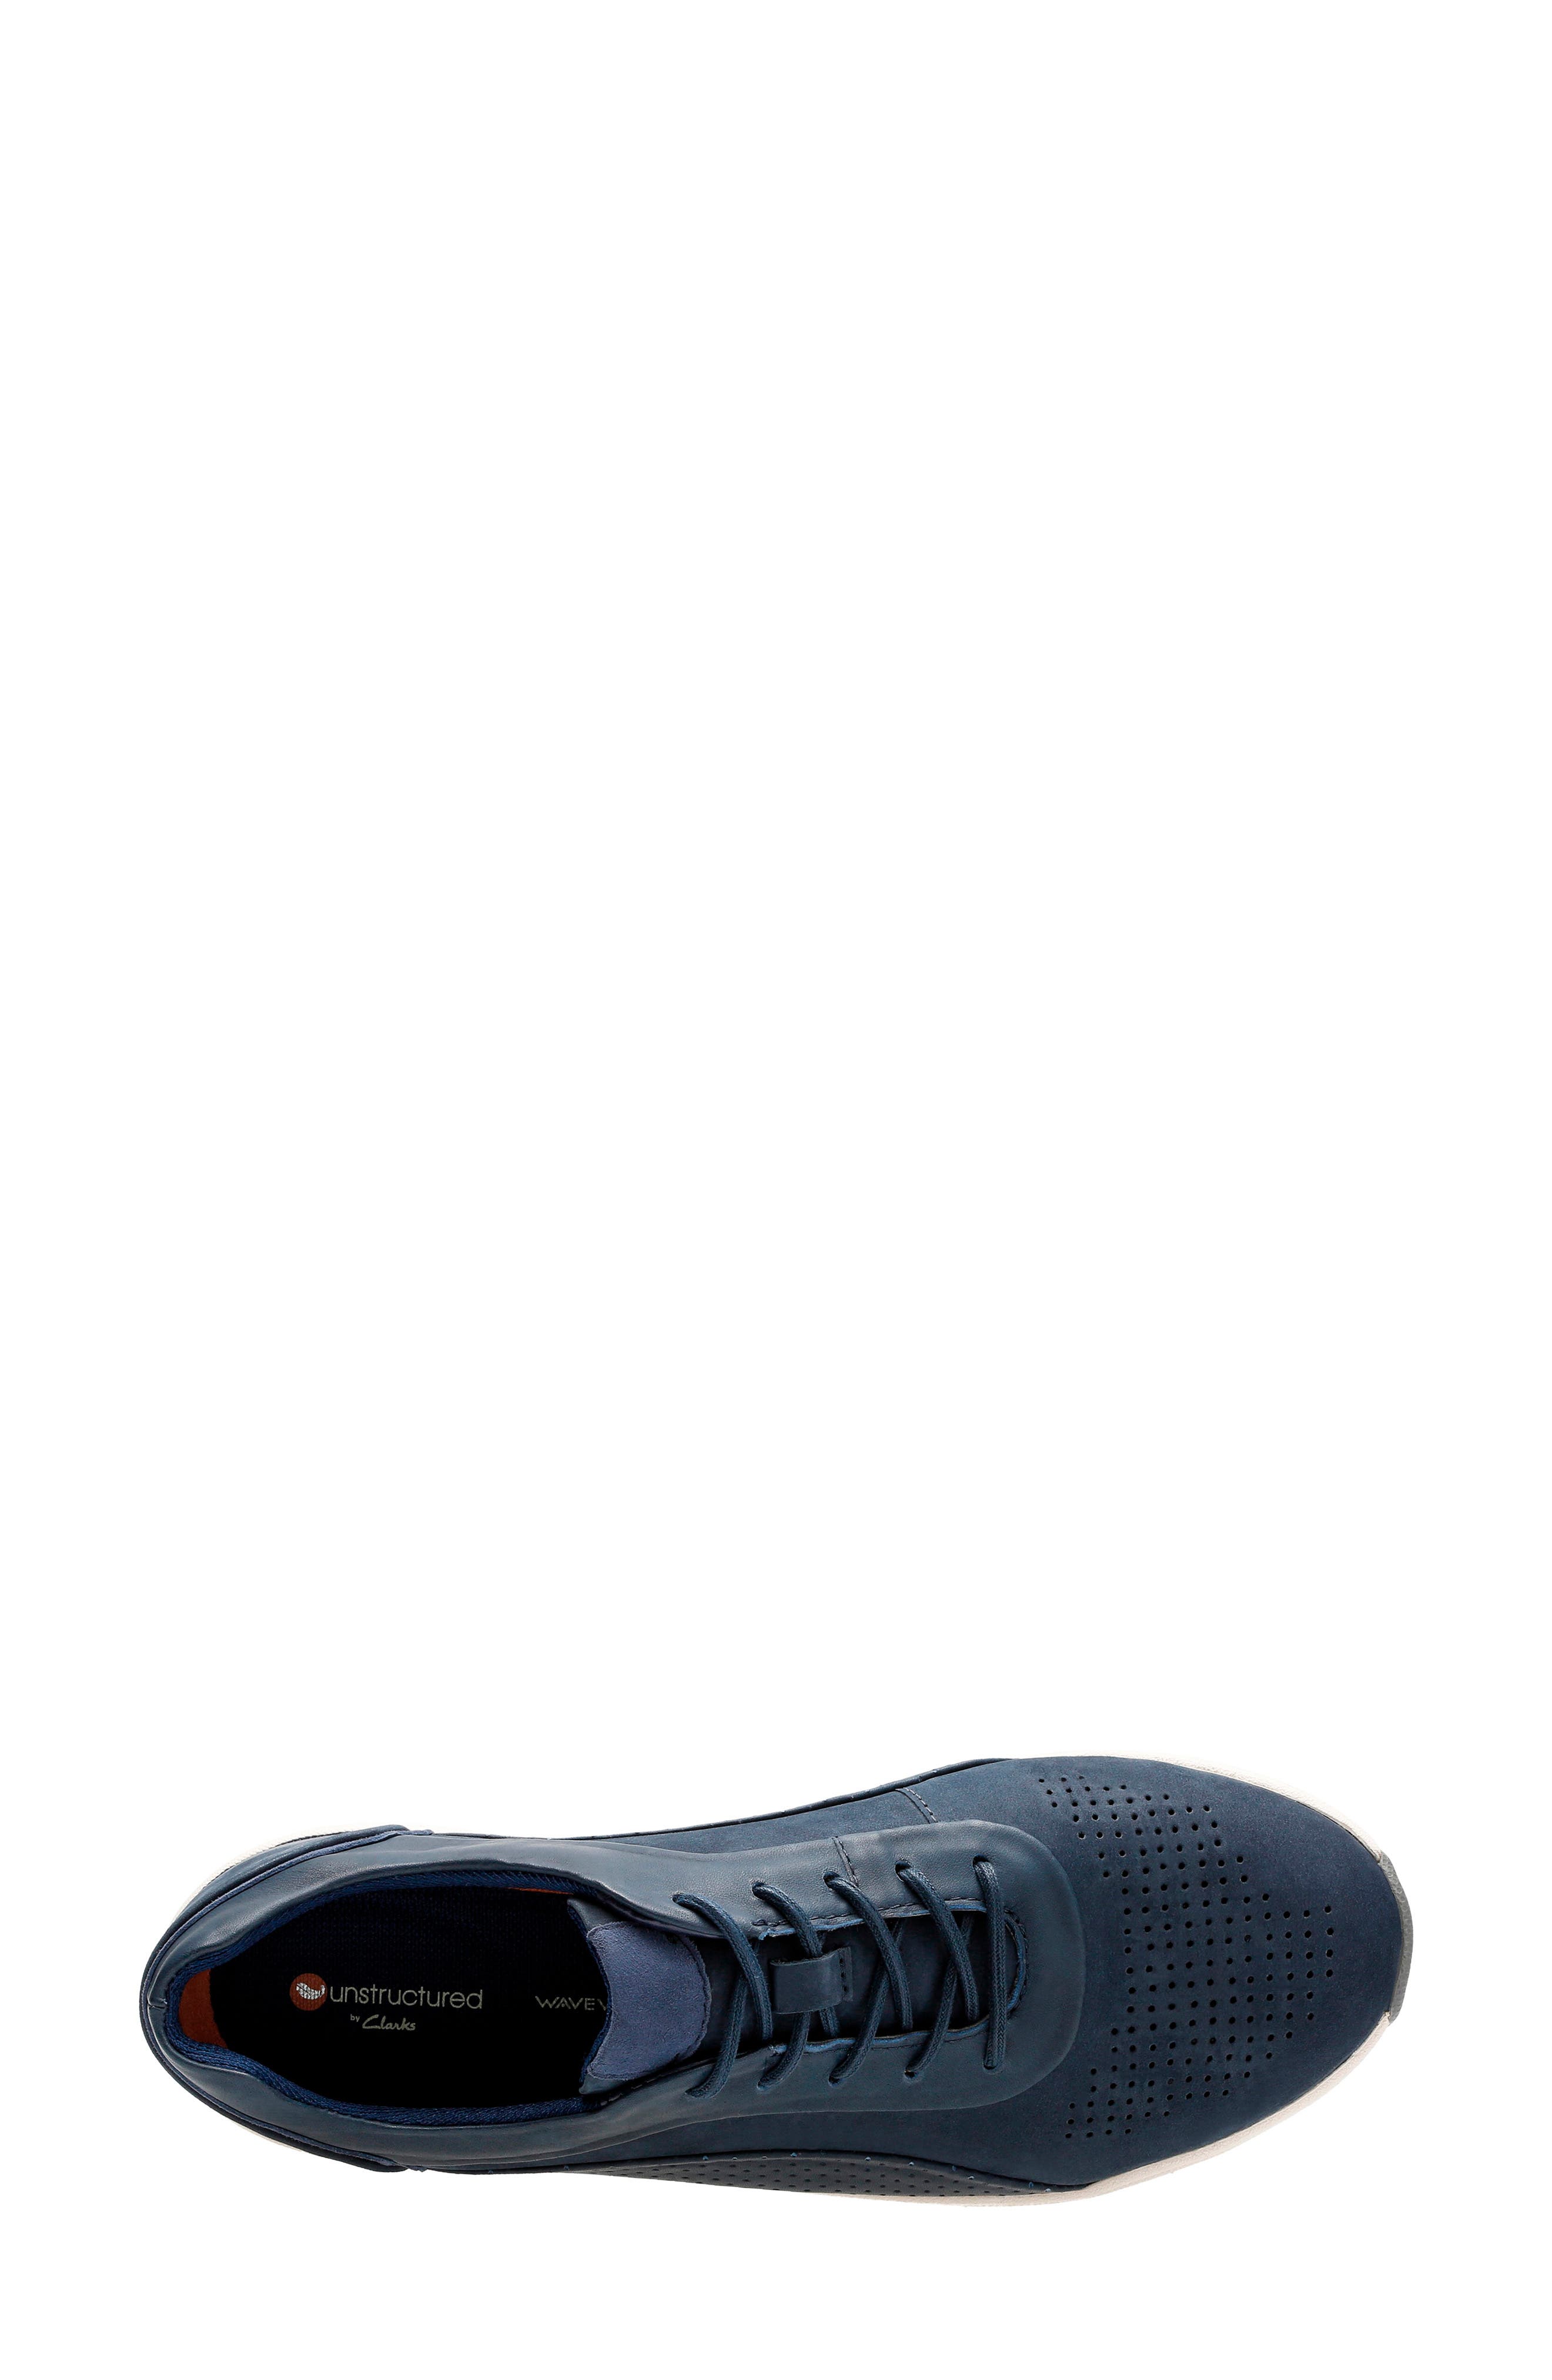 clarks un cruise lace up sneaker